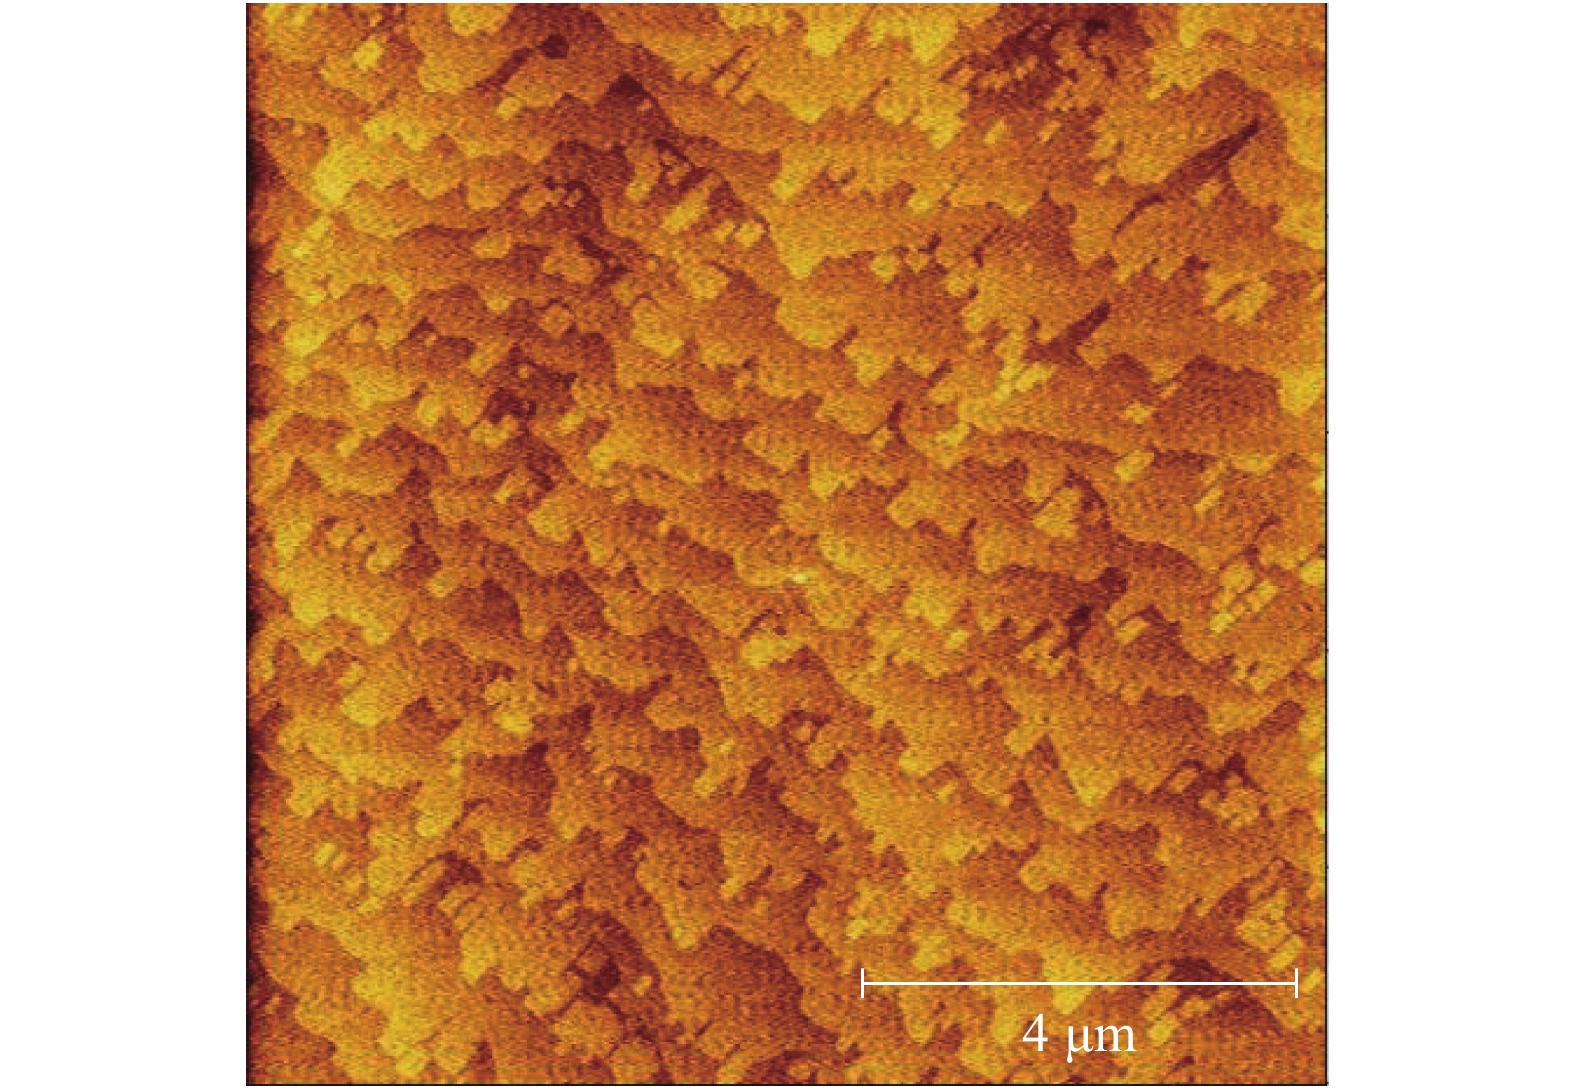 AFM image of the epilayers of the TPV devices